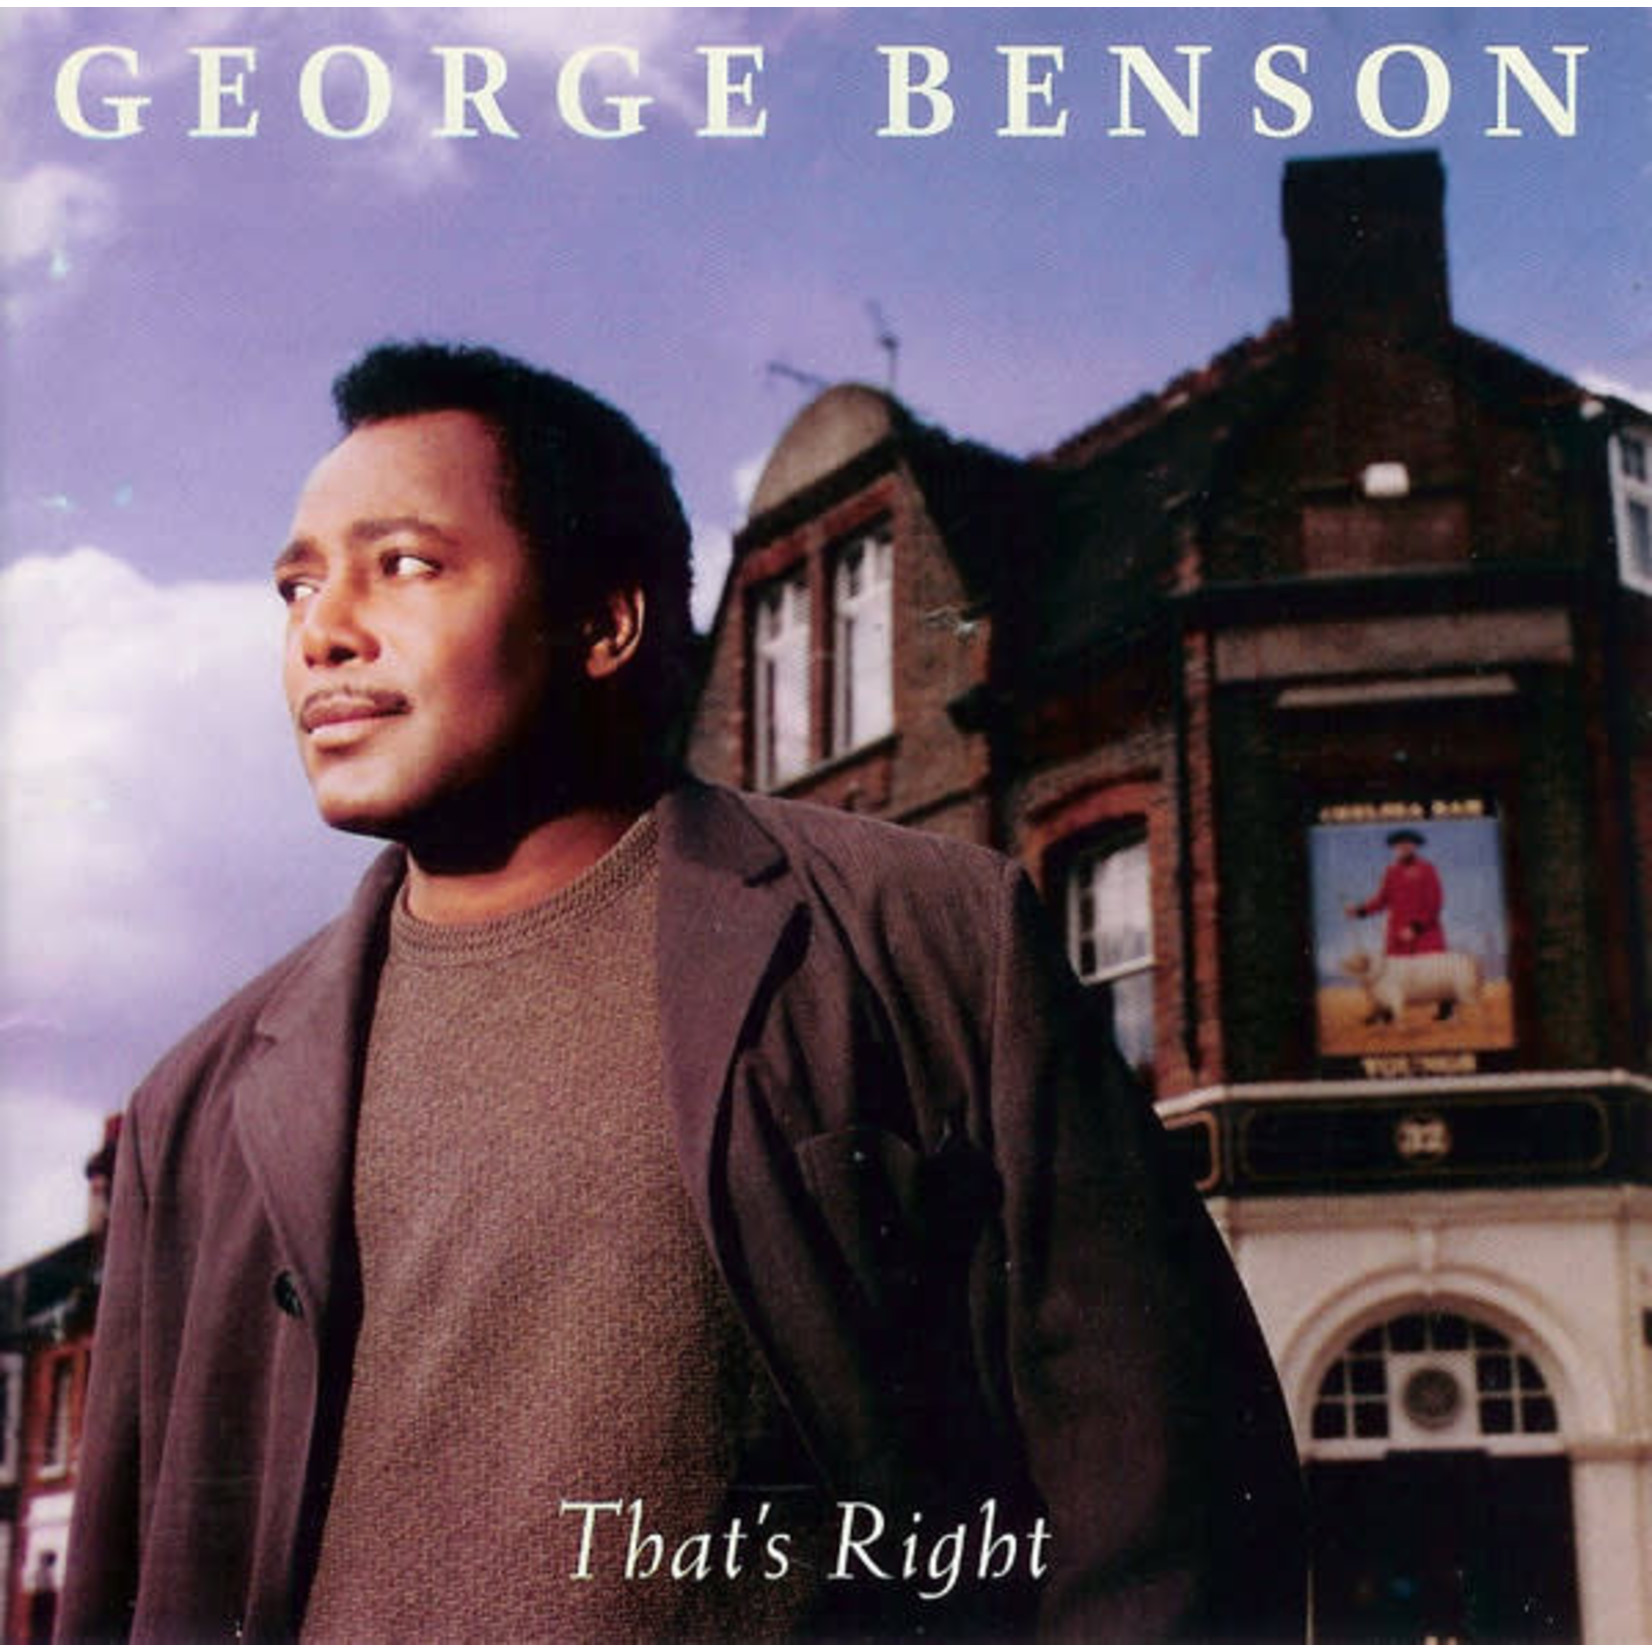 George Benson - That's Right [USED CD]